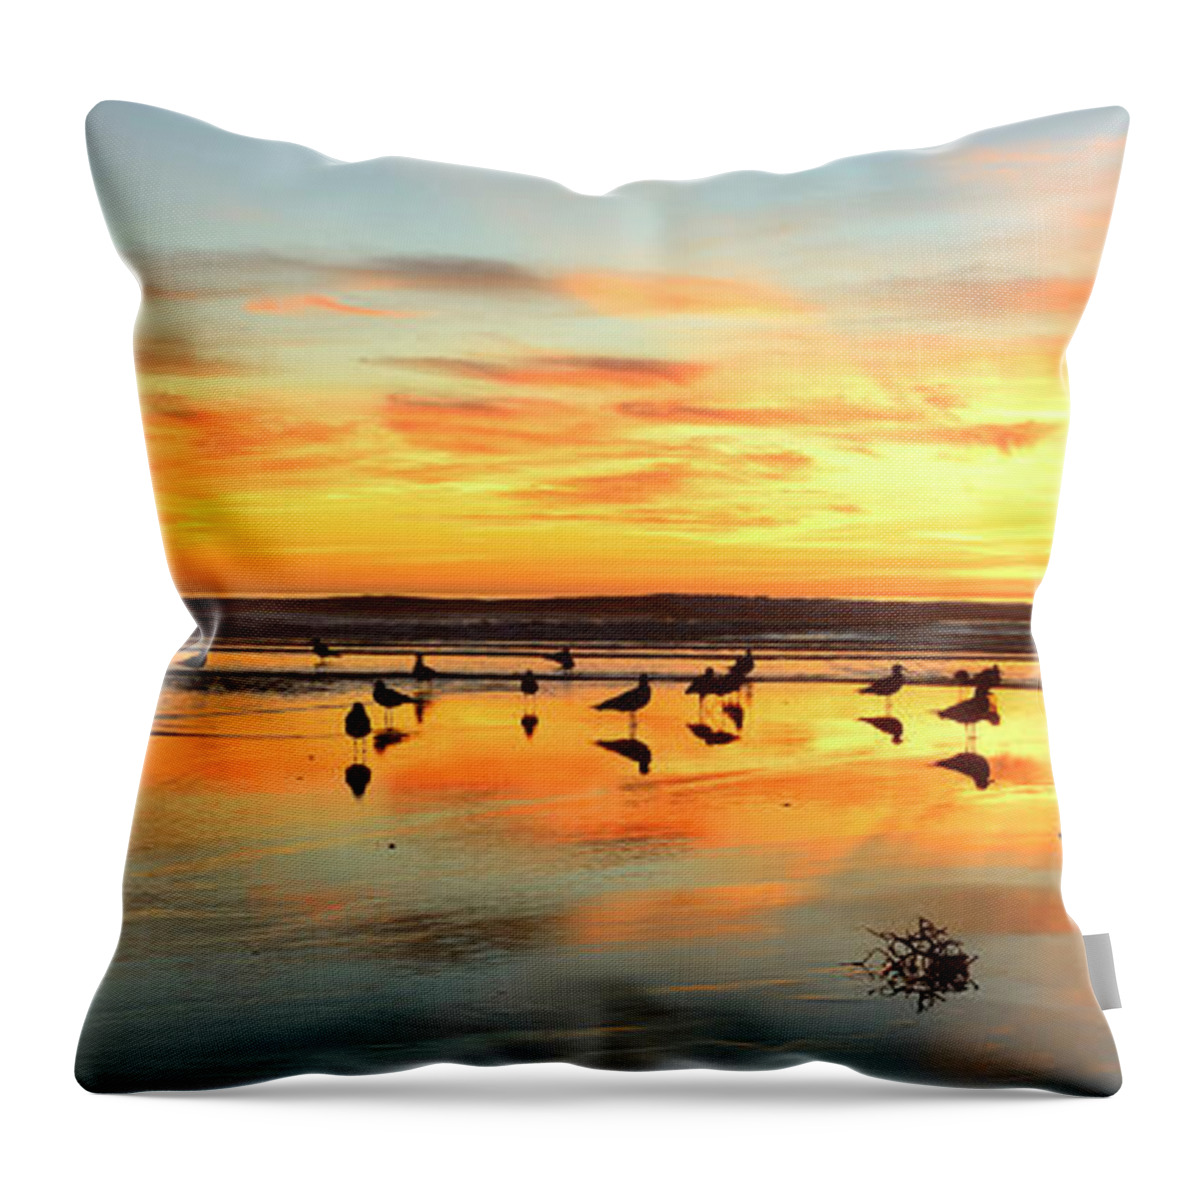 Landscapes Throw Pillow featuring the photograph Cloudburst Cardiff By The Sea by John F Tsumas